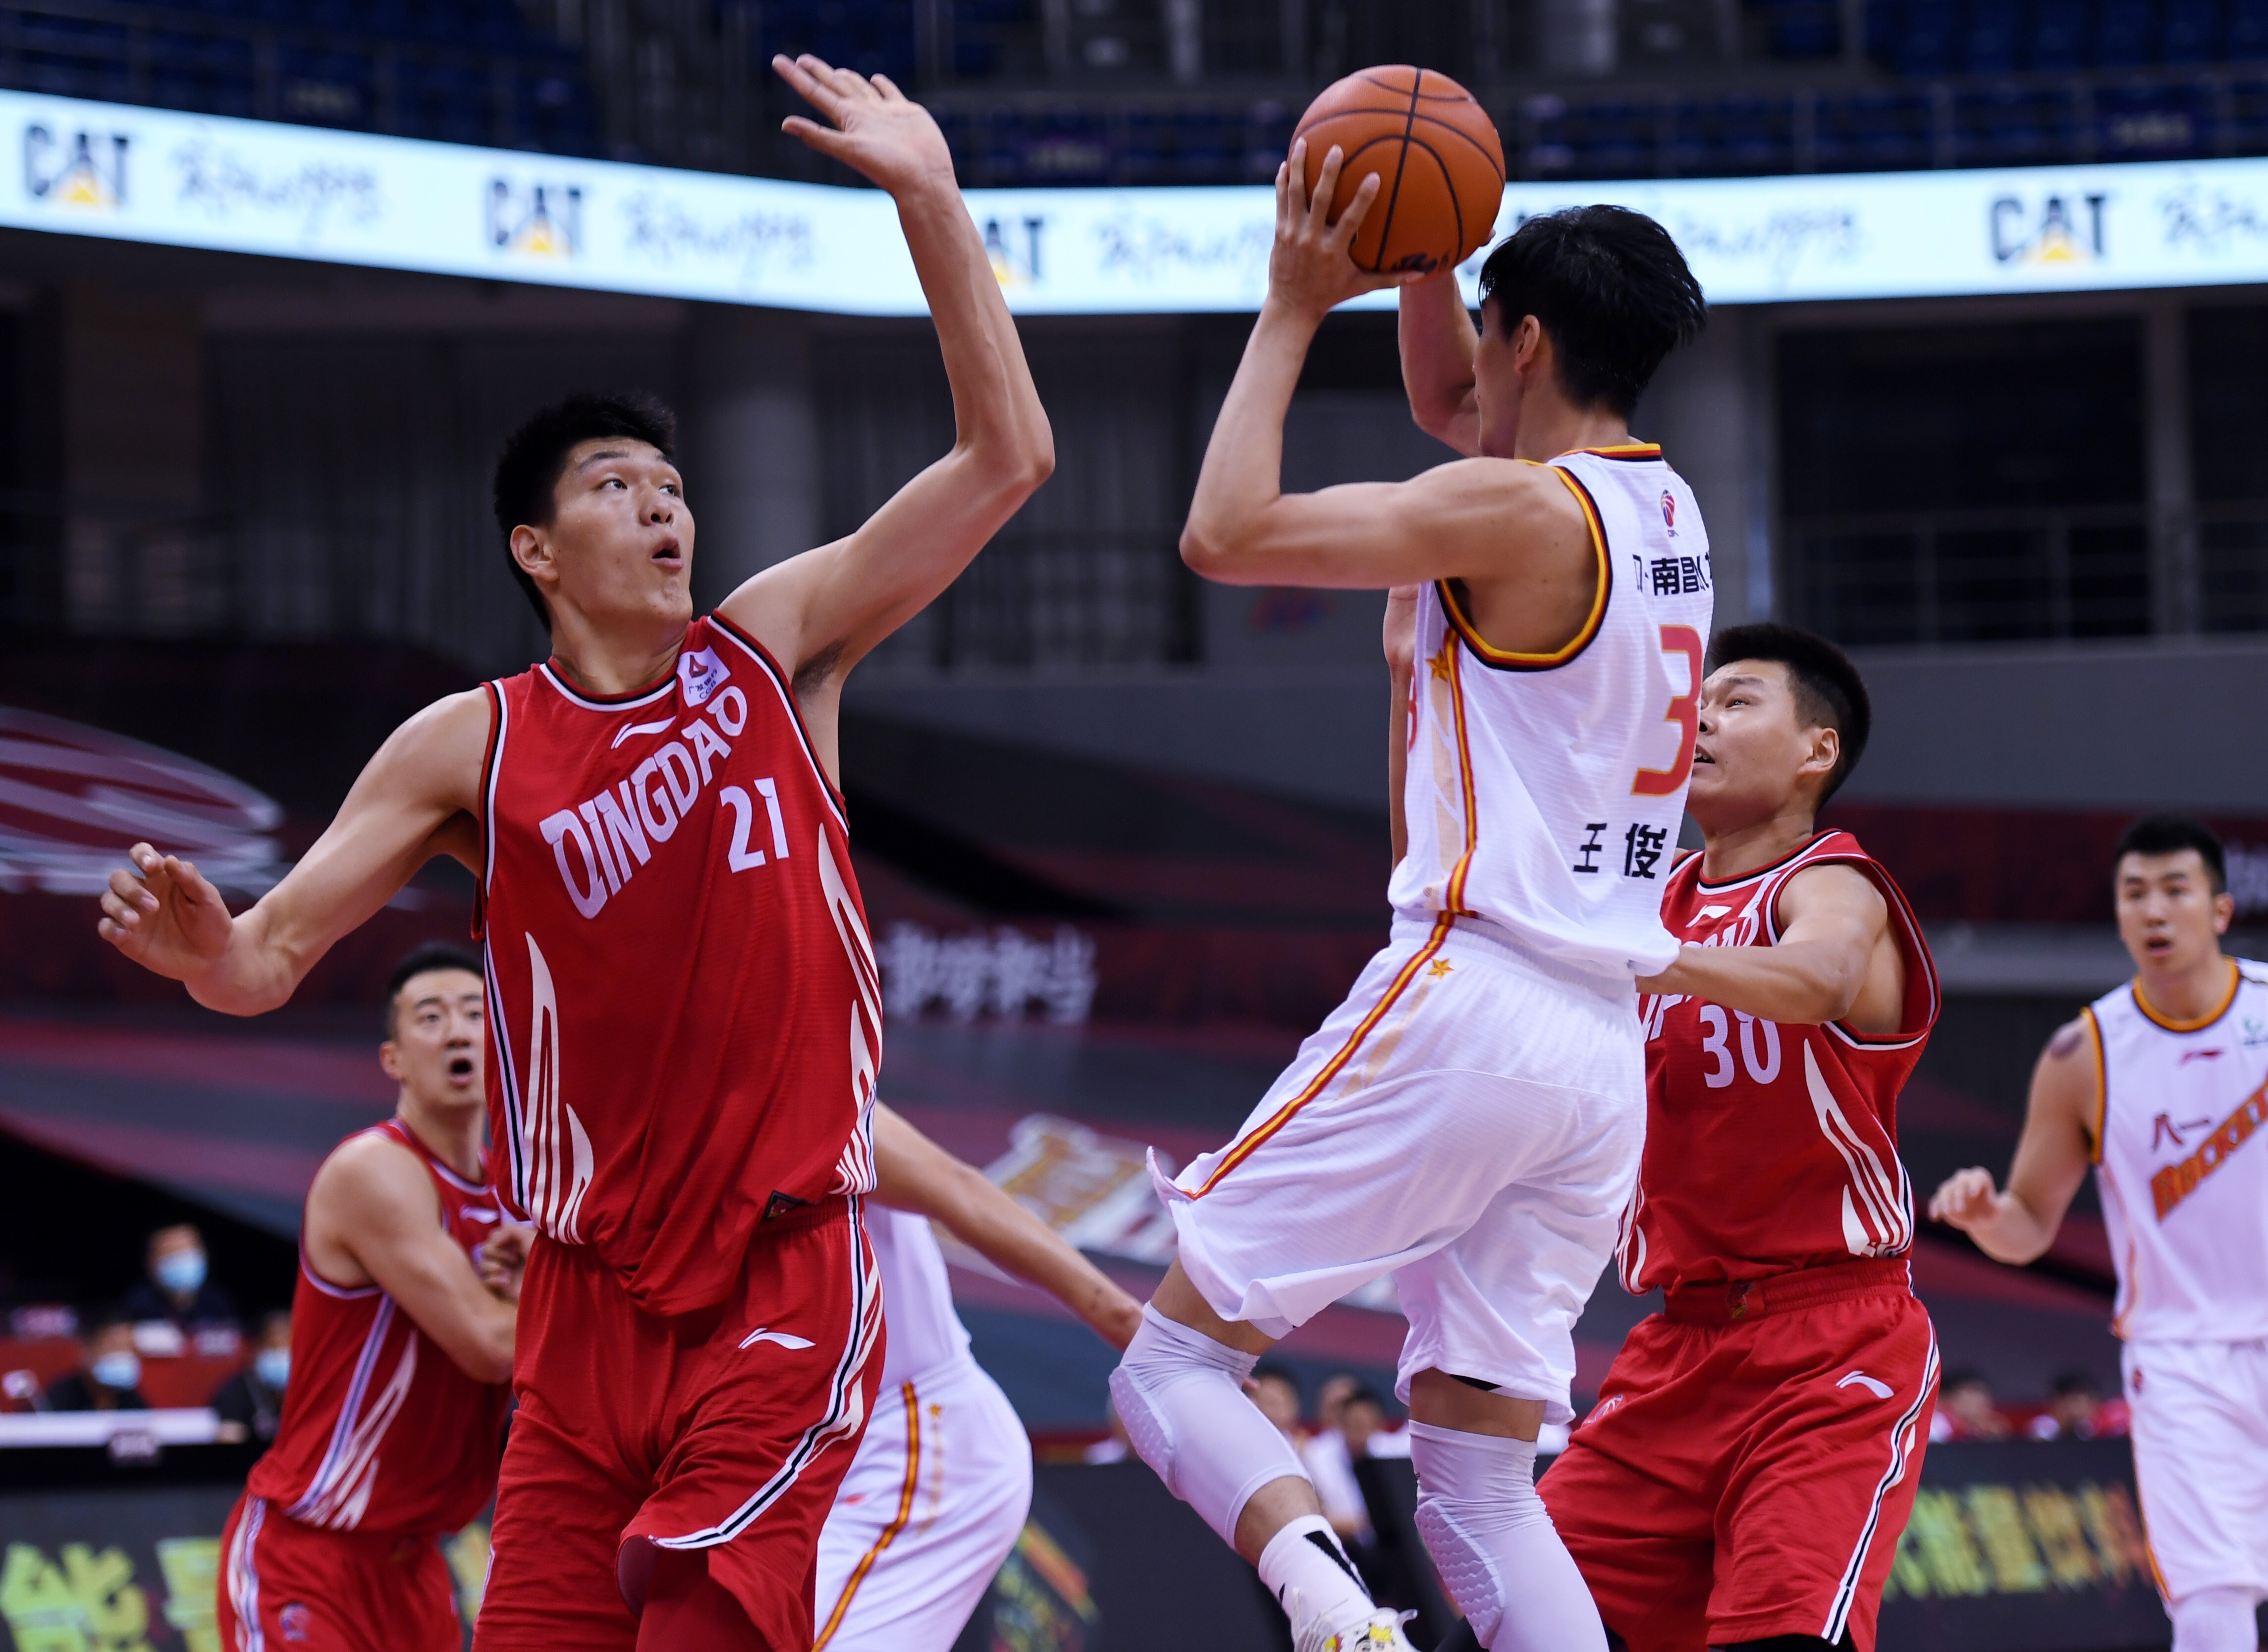 Chinese basketball player Zhou Qi aims for bigger stage-Xinhua